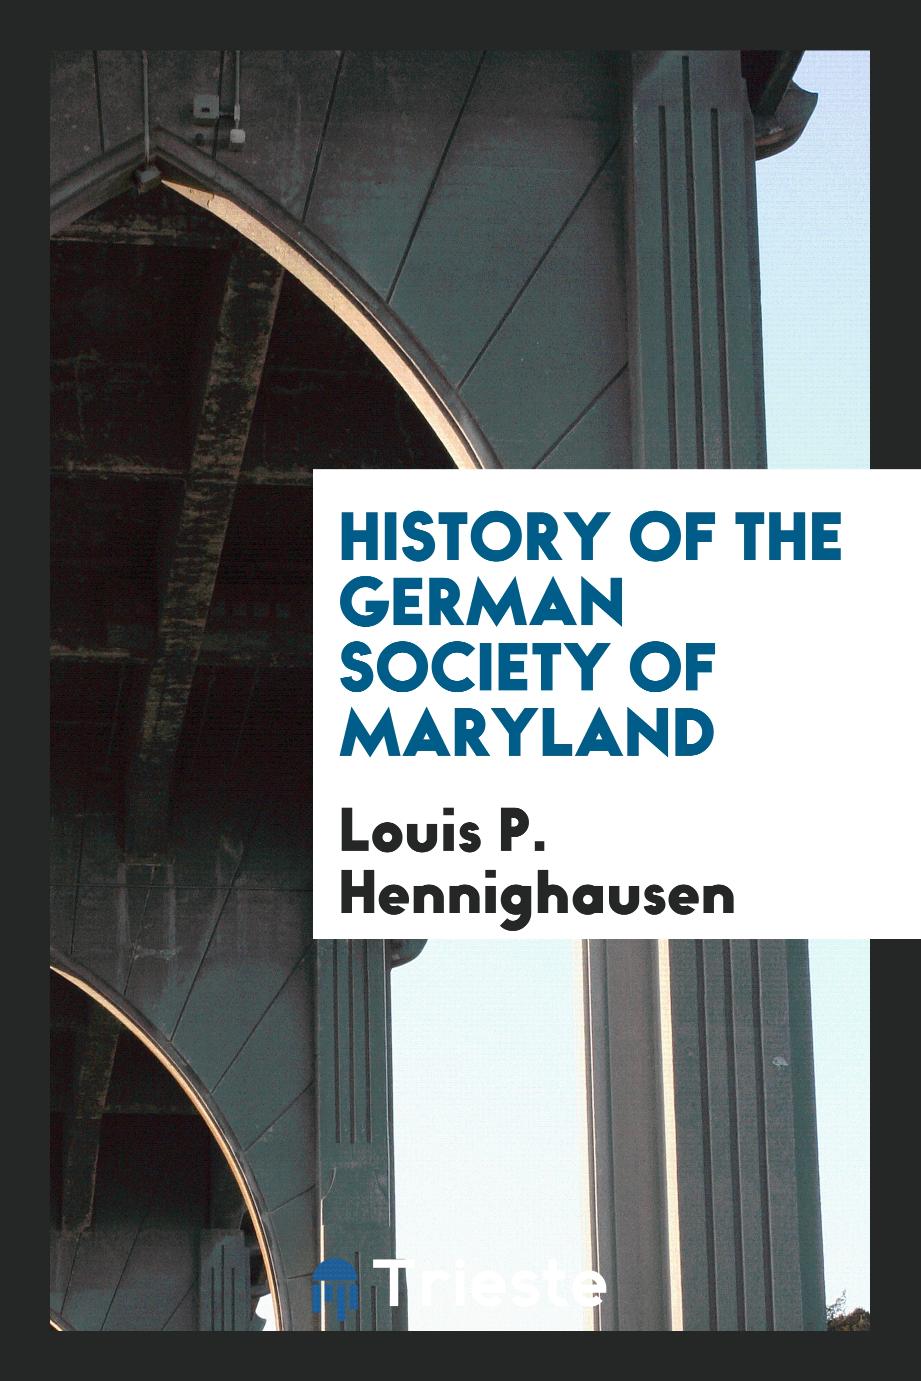 History of the German society of Maryland